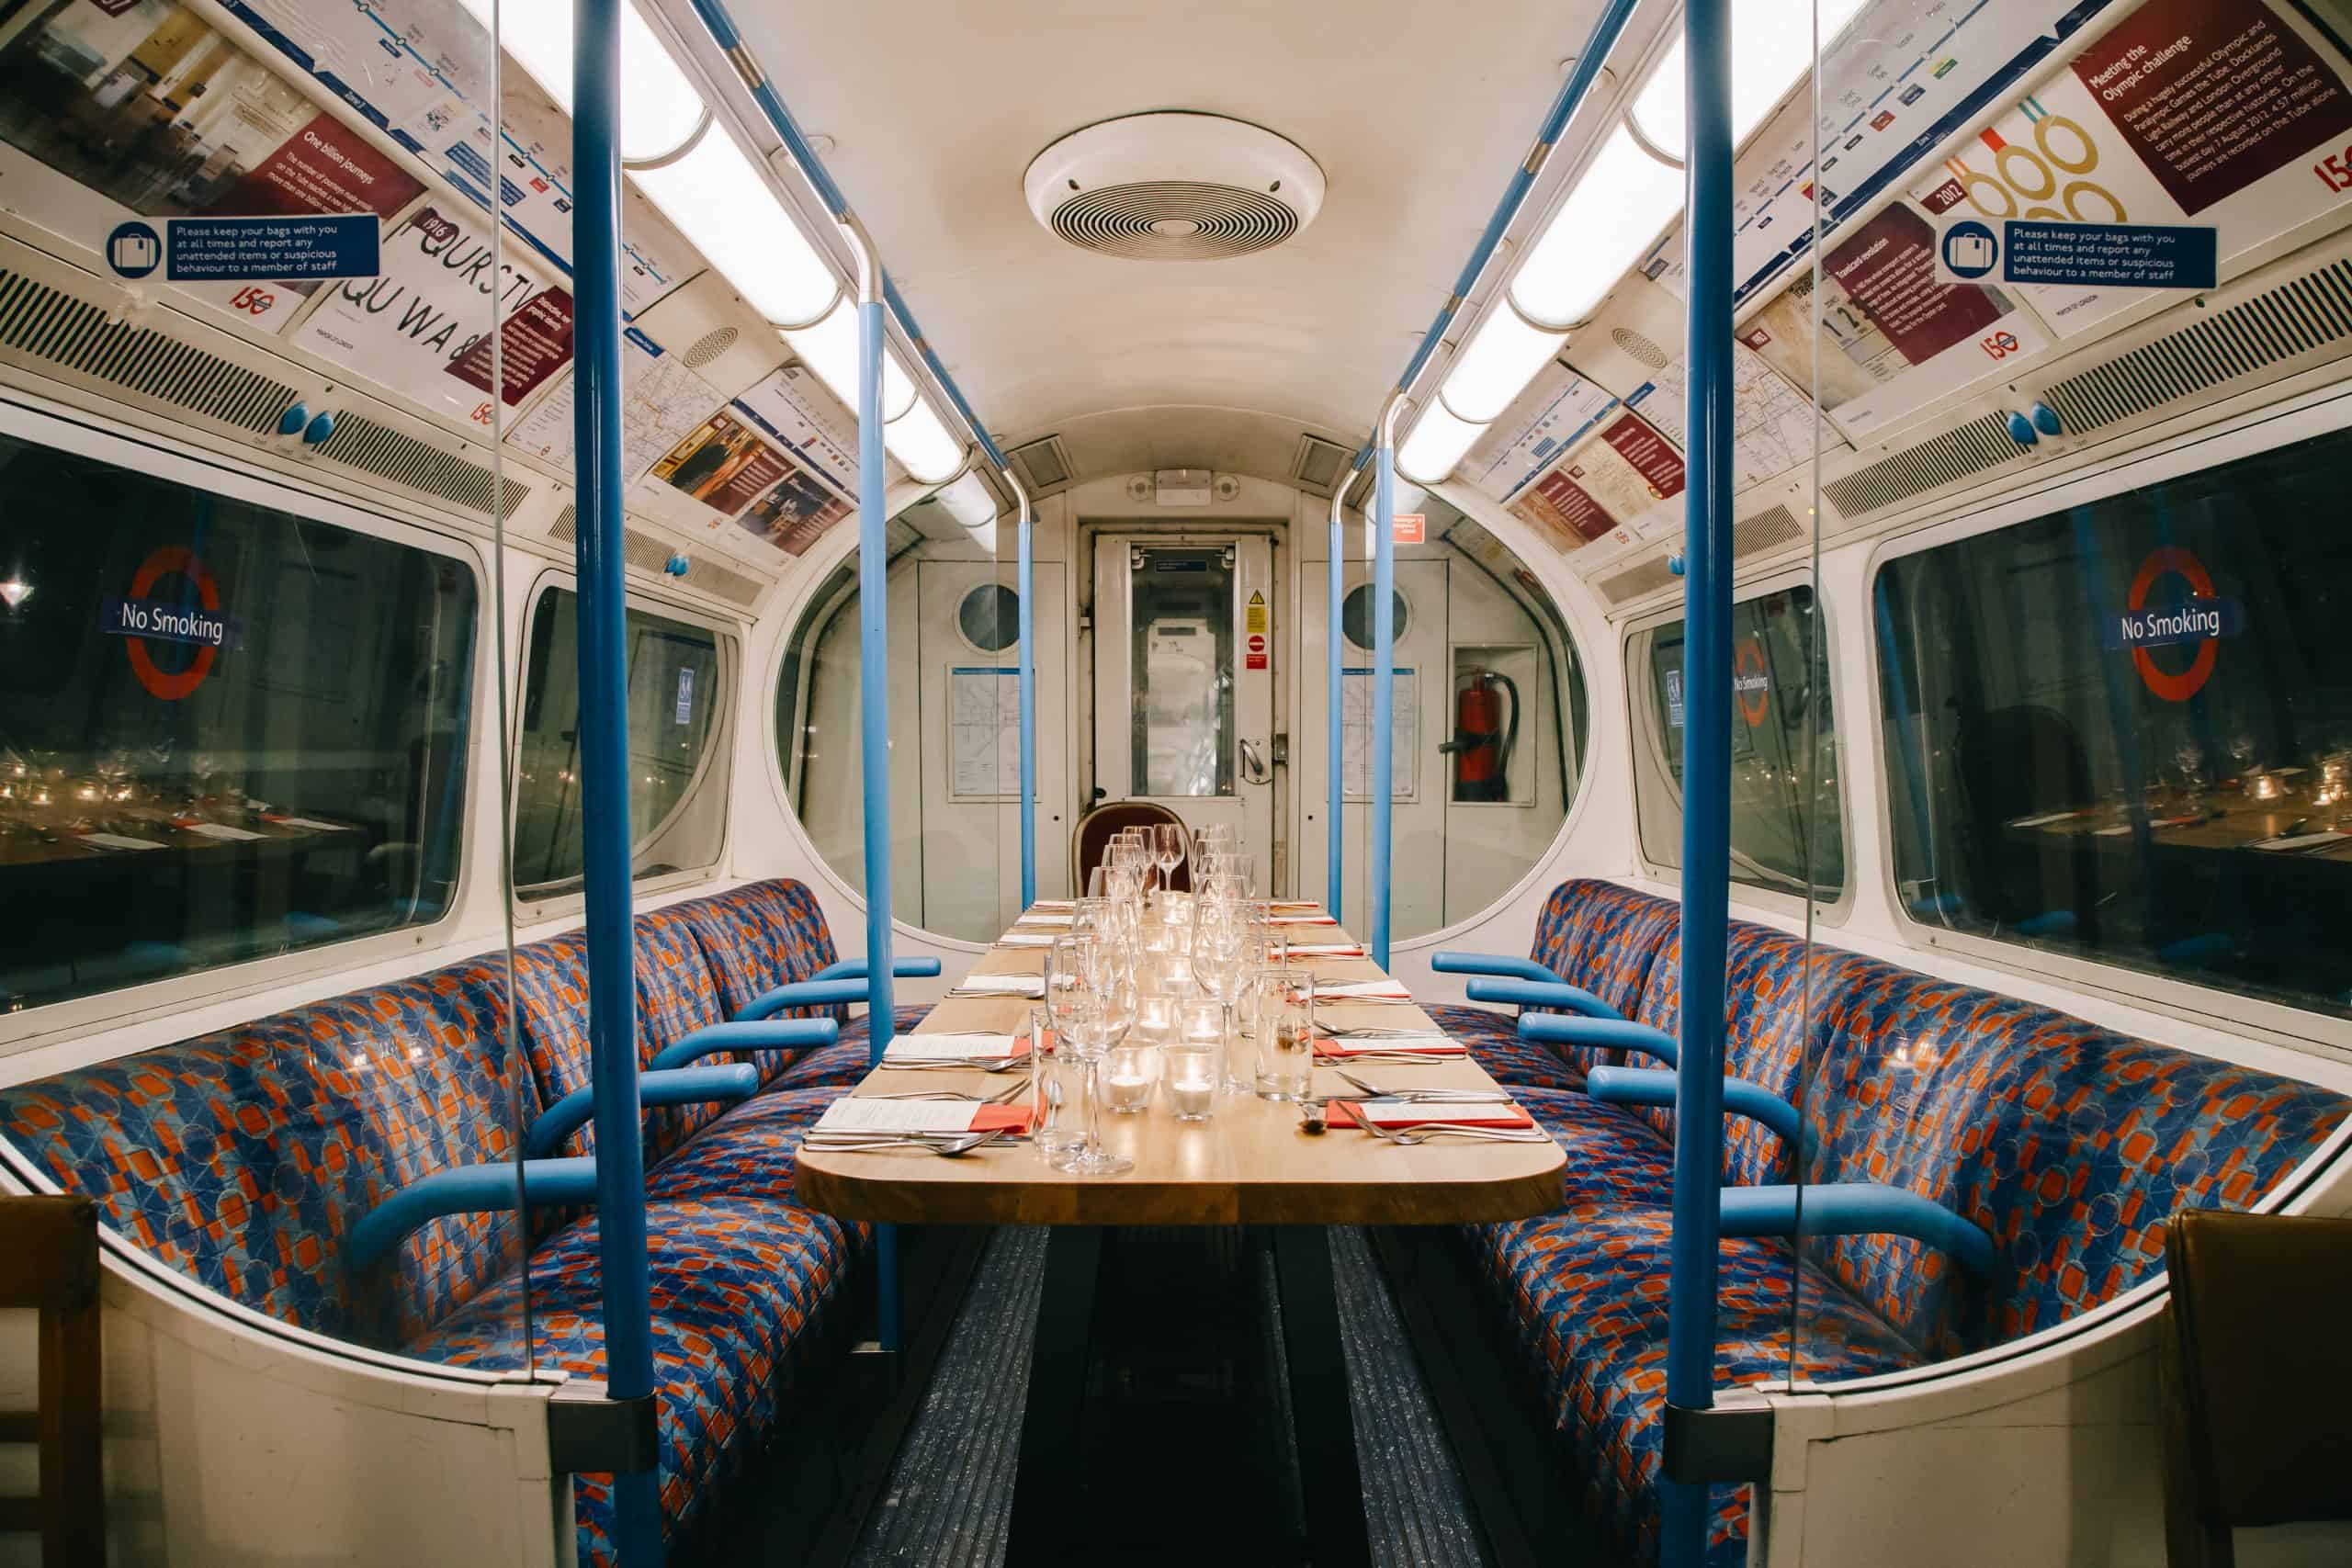 Dine in a tube carriage at London’s most unique supperclub